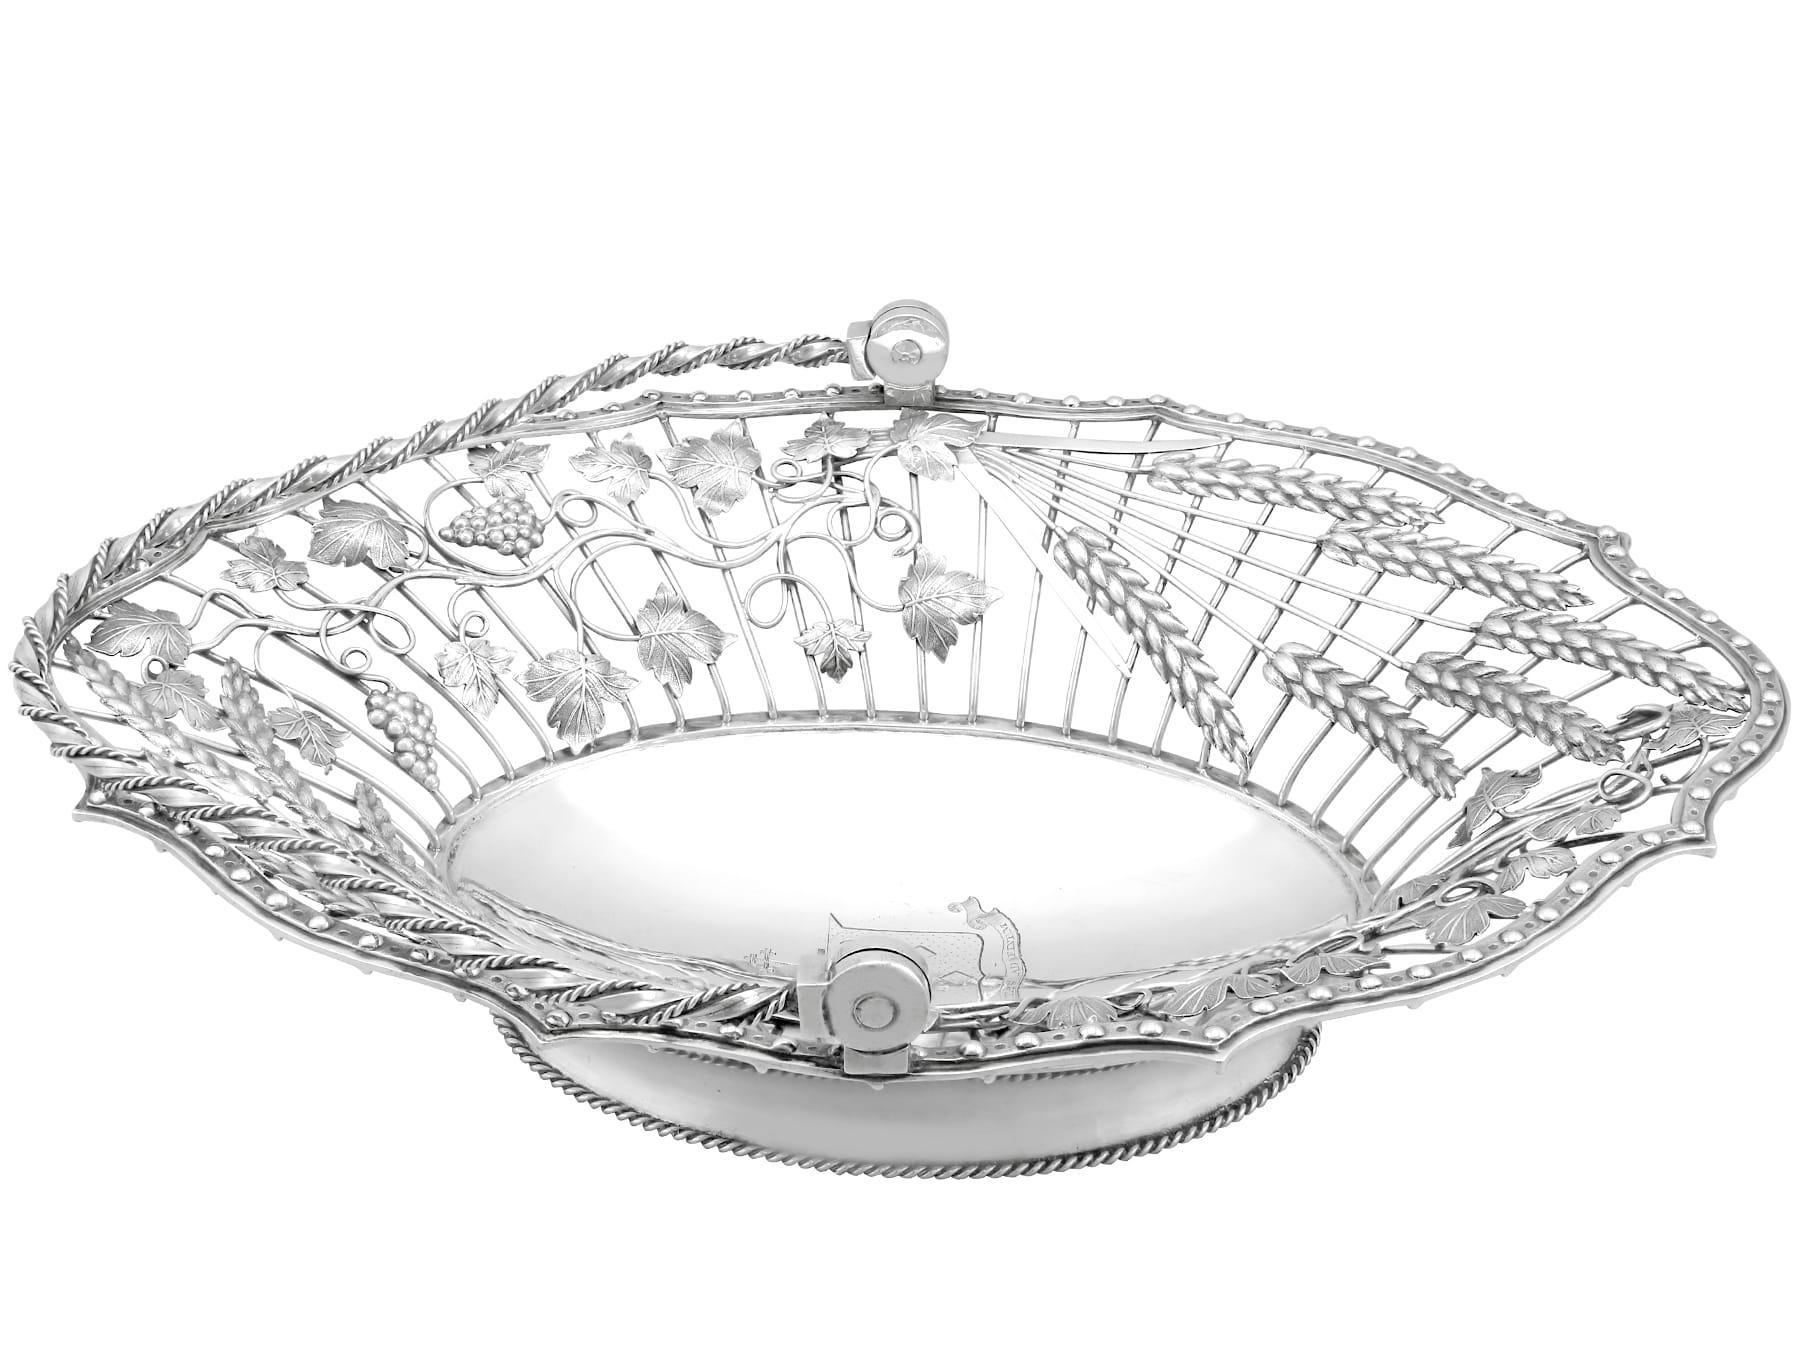 Antique Sterling Silver Cake / Fruit Basket (1767) In Excellent Condition For Sale In Jesmond, Newcastle Upon Tyne